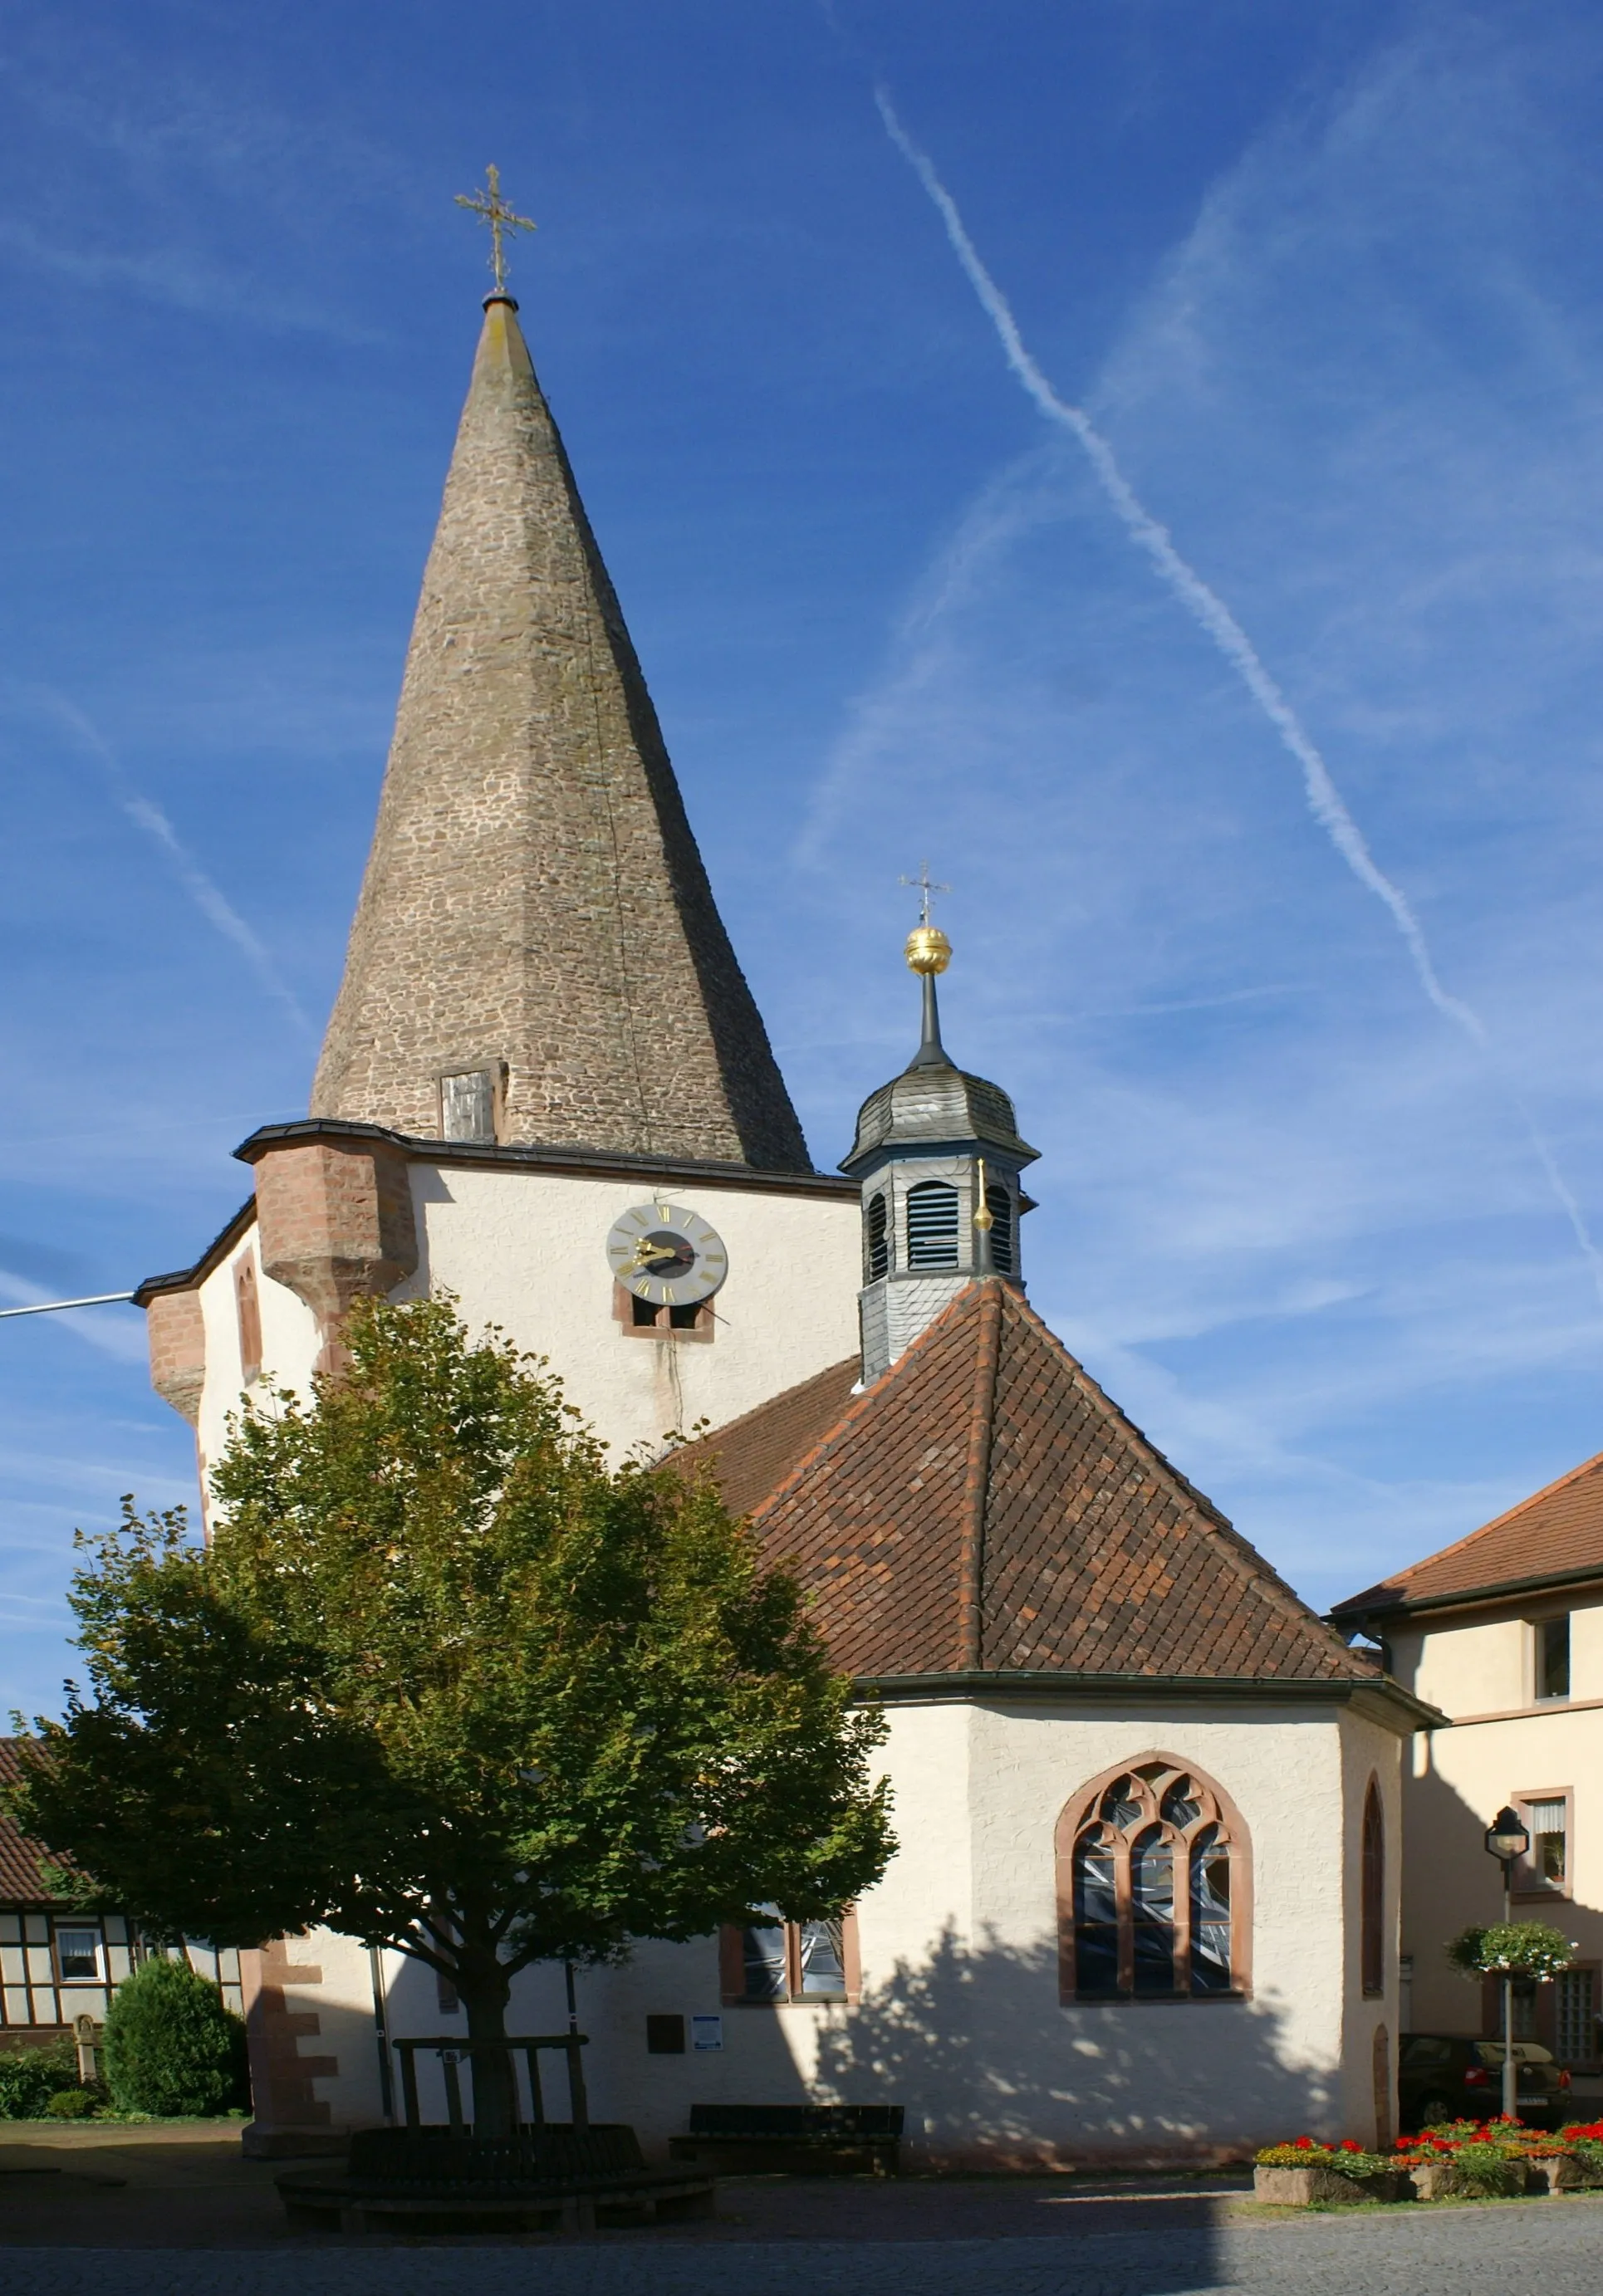 Photo showing: The St. Lukaskapelle - Chapel of St. Lukas - was built in 1449 and is located in the centre of Schöllkrippen